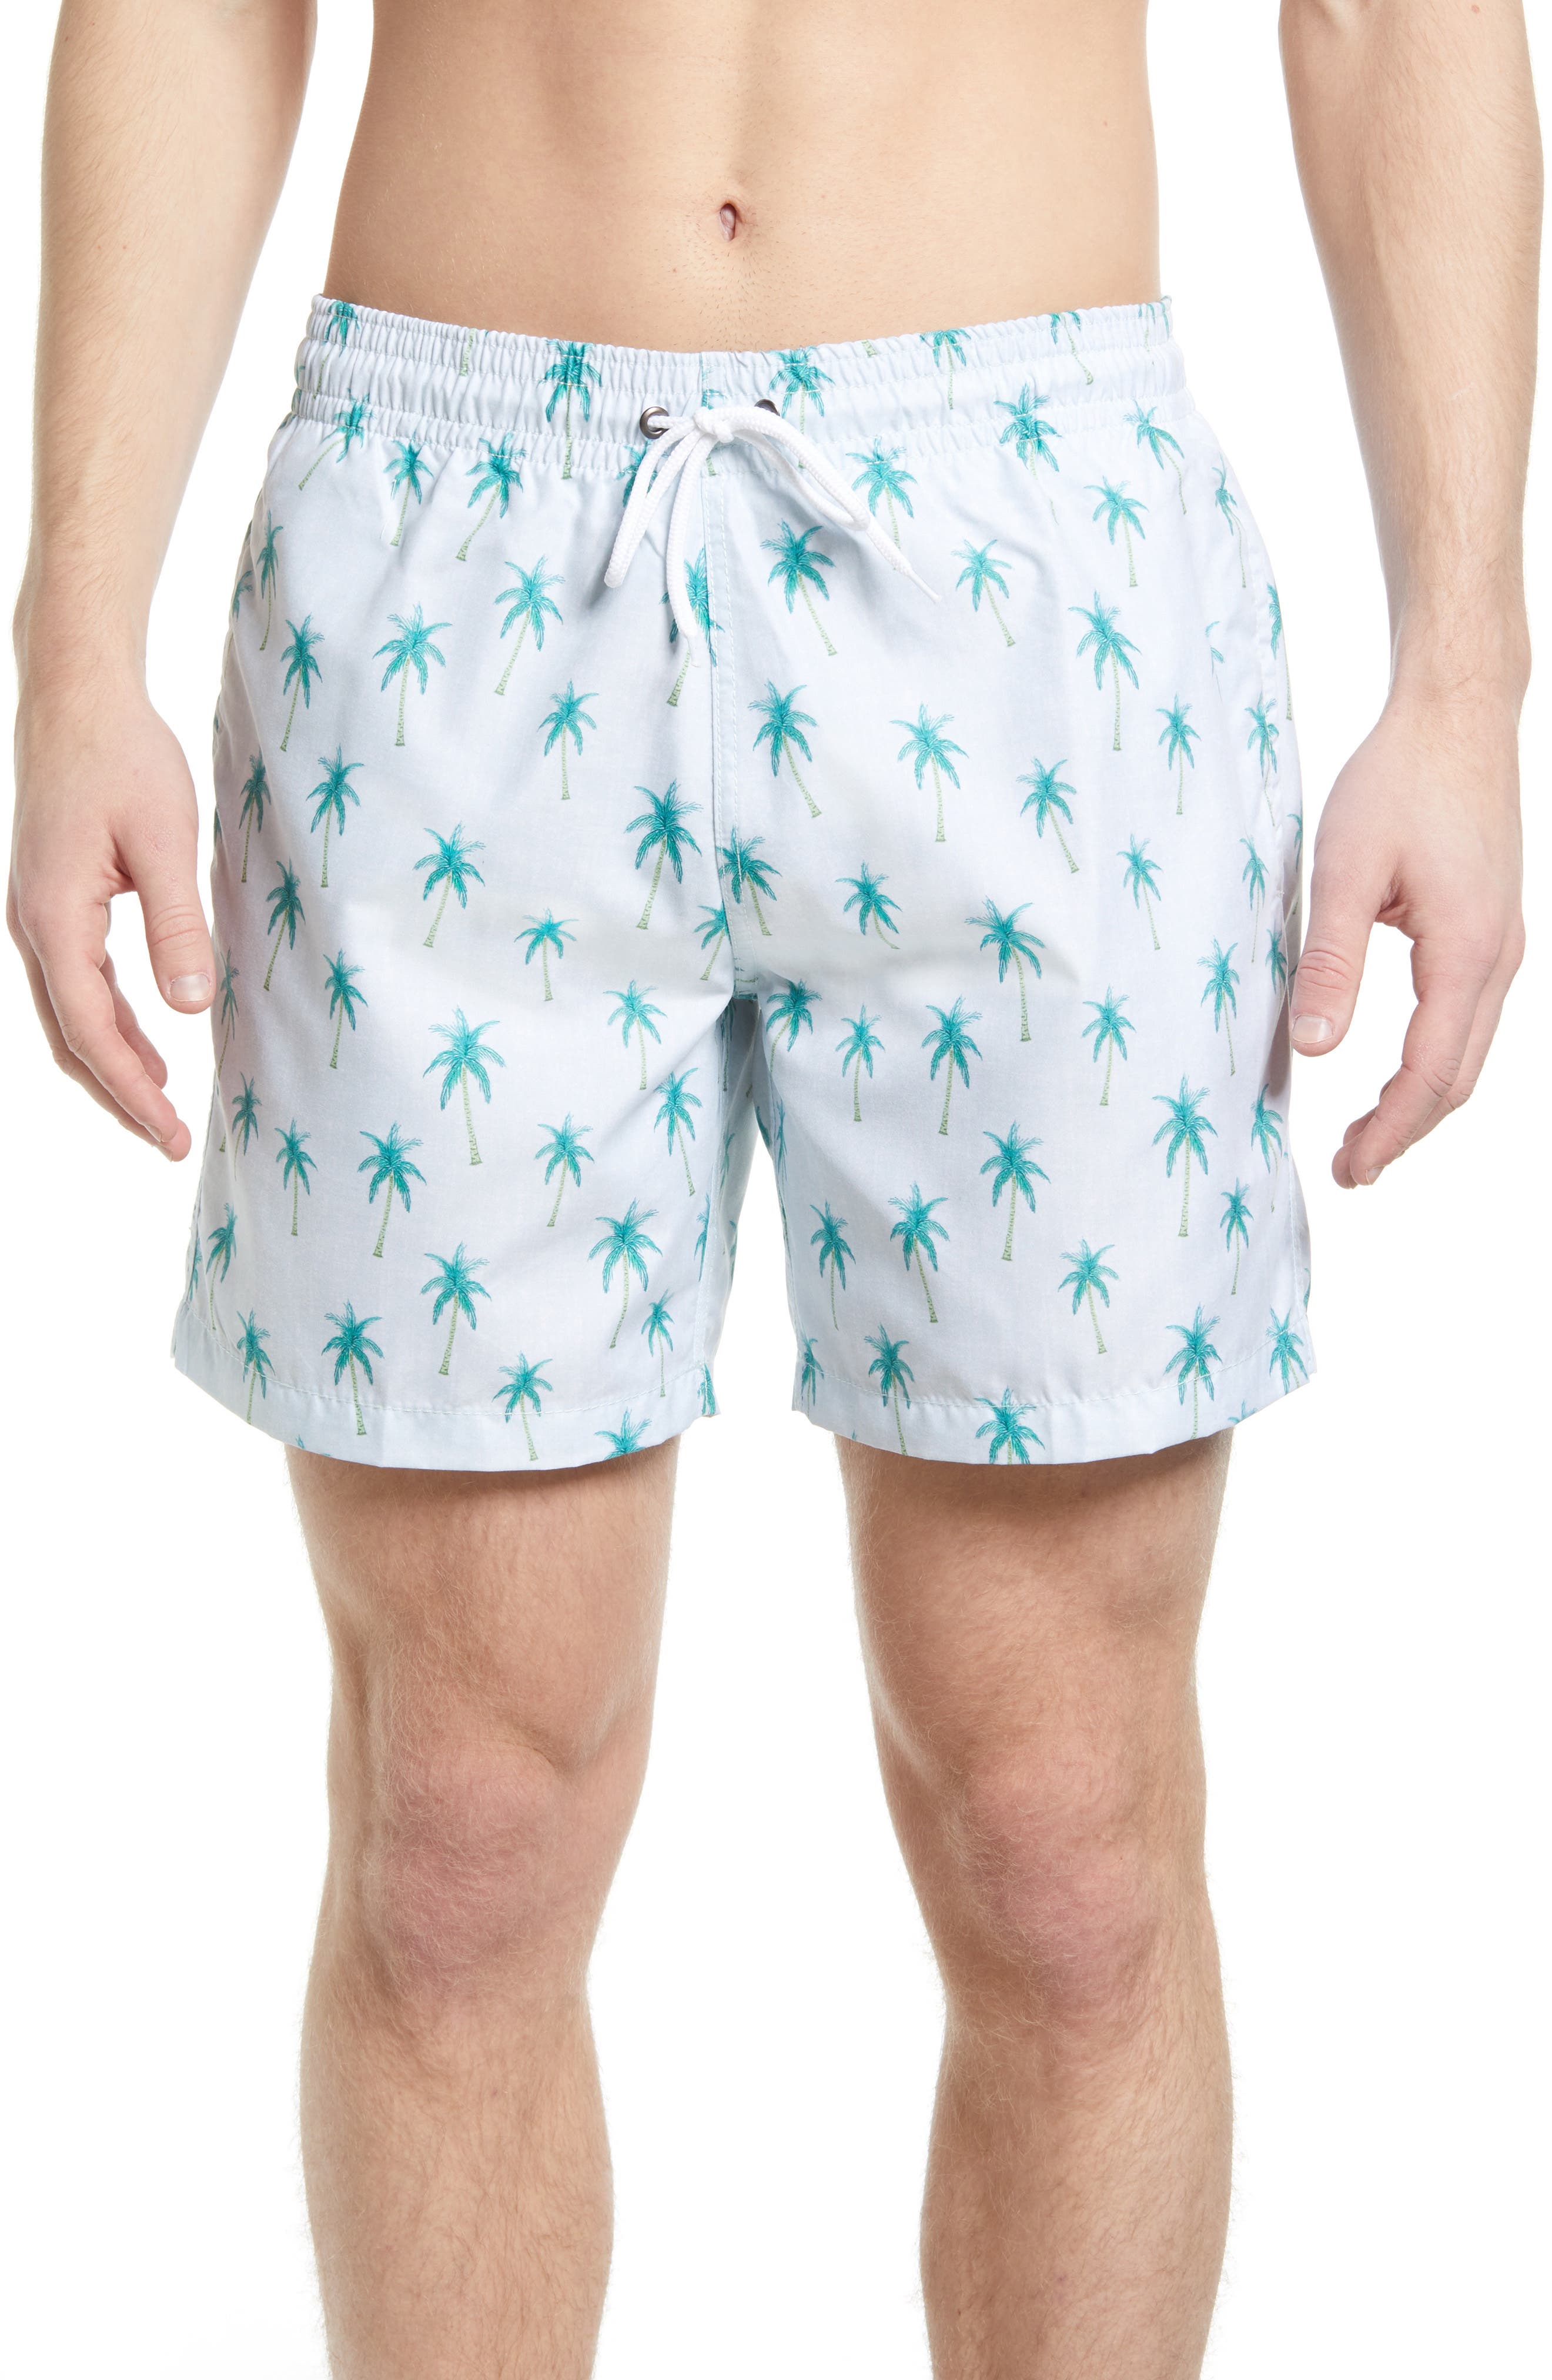 Quick Dry Mens Beach Shorts Sparkly Flamingo Pattern Mesh Lining Surfing Swim Board Trunks with Pockets 